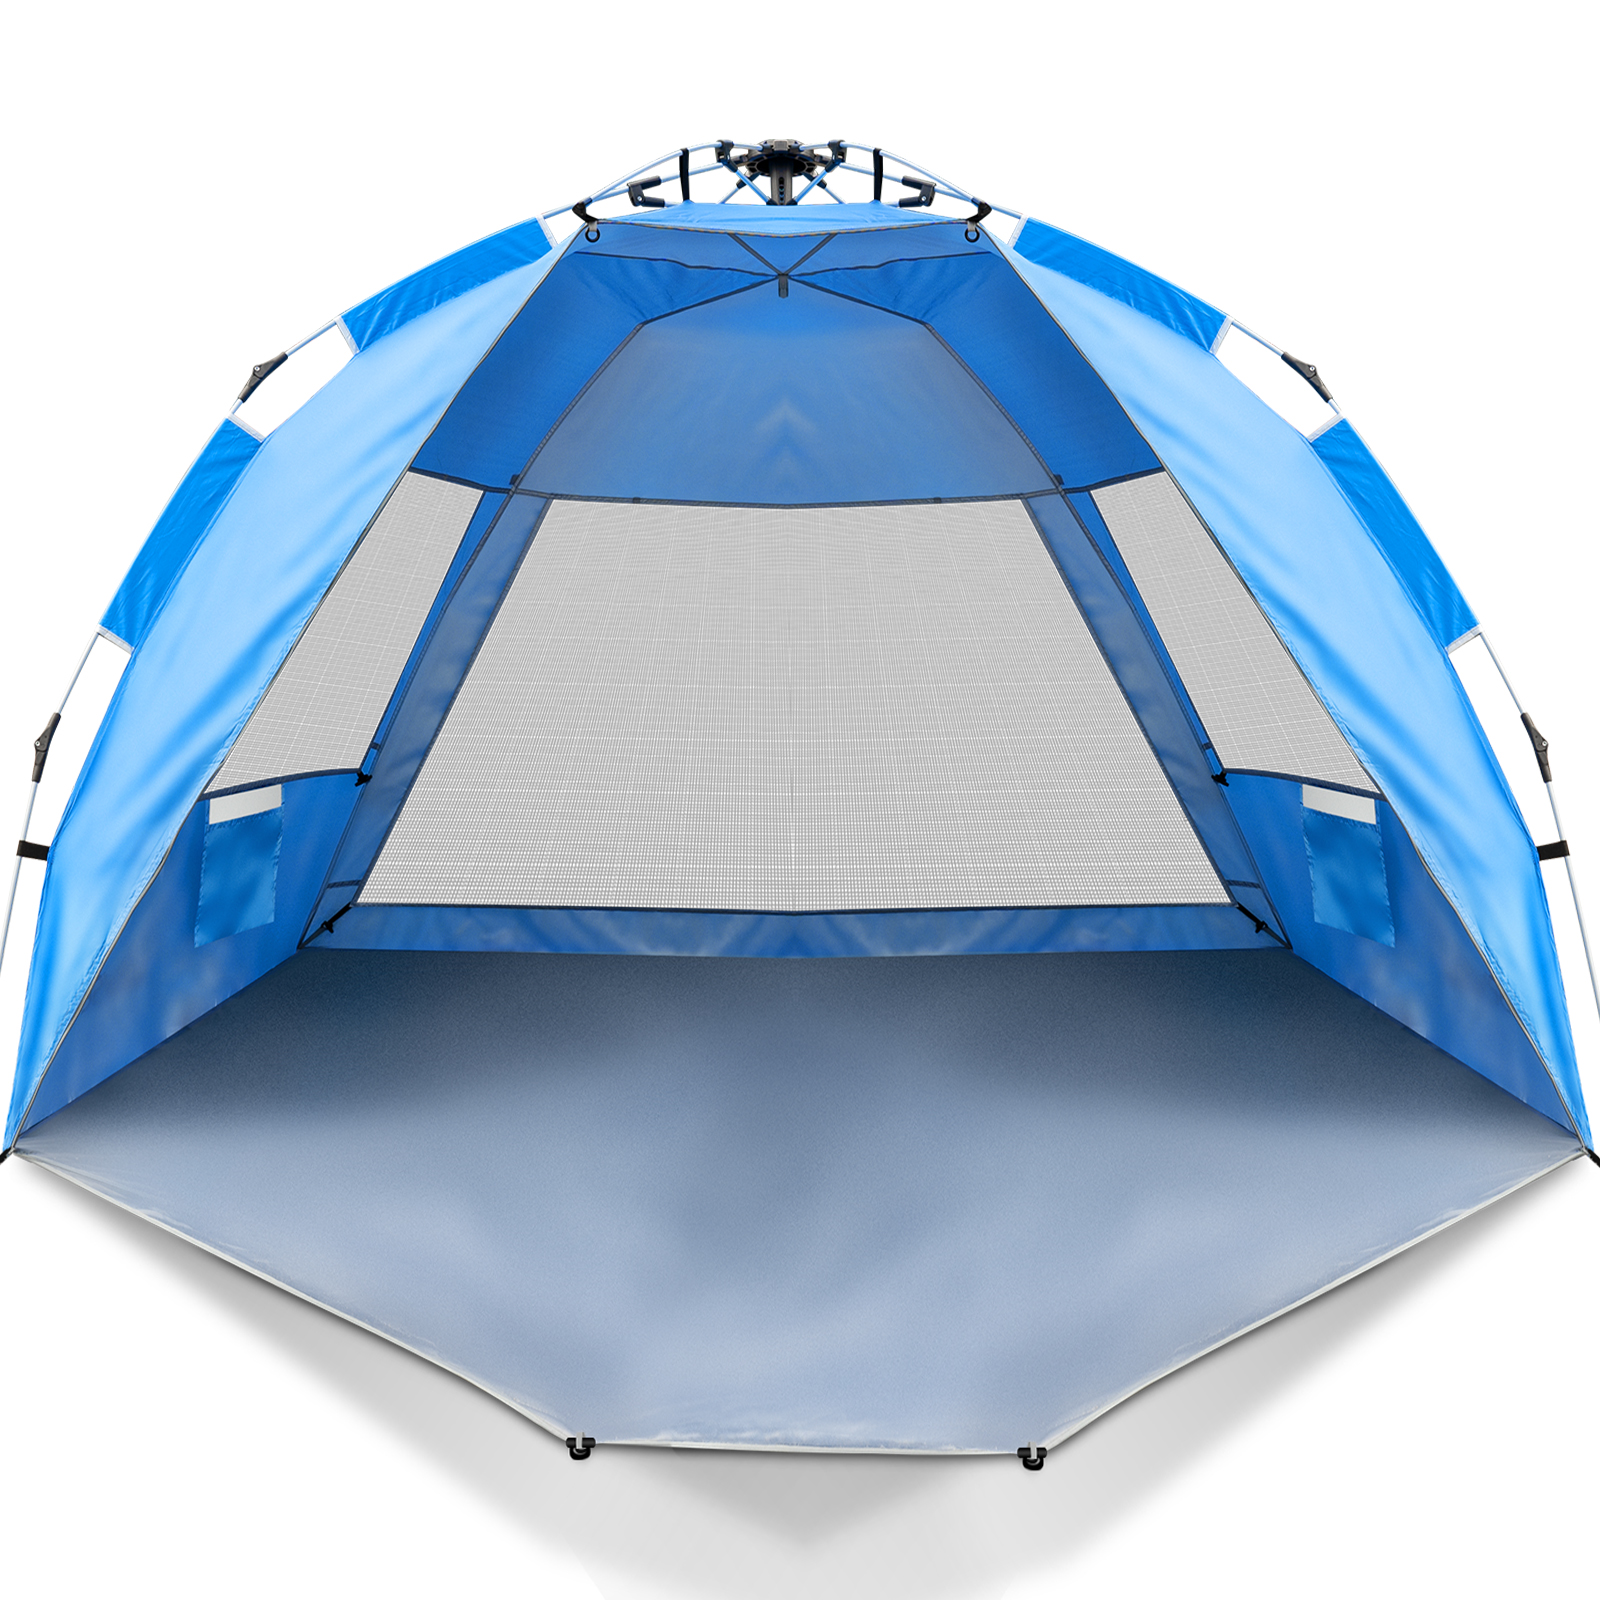 SUNOYAR Beach Tent, 4-6 Person Pop-up Beach Tent Sun Shelter, UPF 50+ UV Protection Portable Waterproof Beach Tent, Sunshade with Extendable Floor for Family, Fishing, Camping, Blue - image 1 of 8